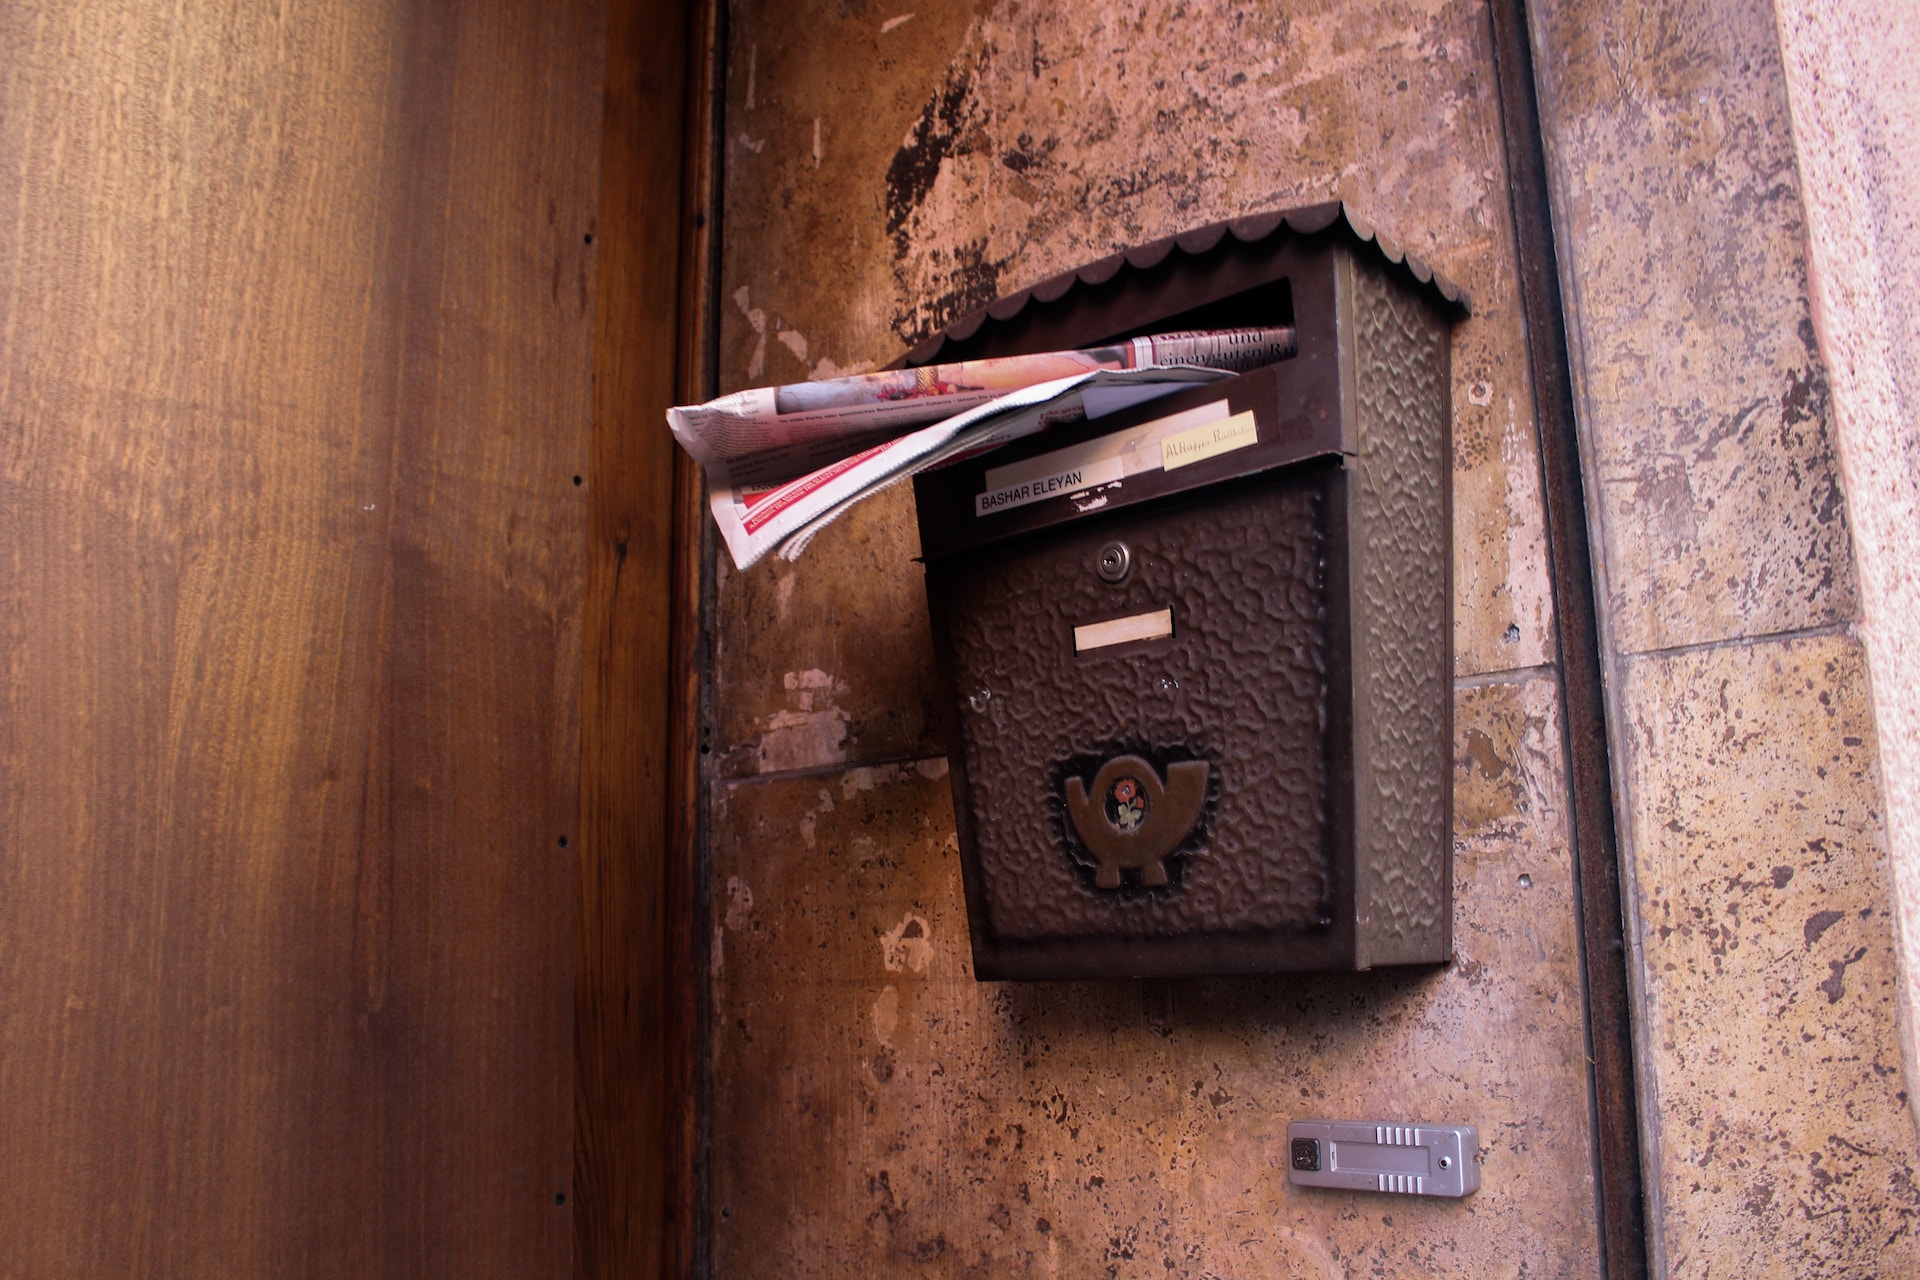 Description: a close-up image of a letterbox, overflowing with mail.